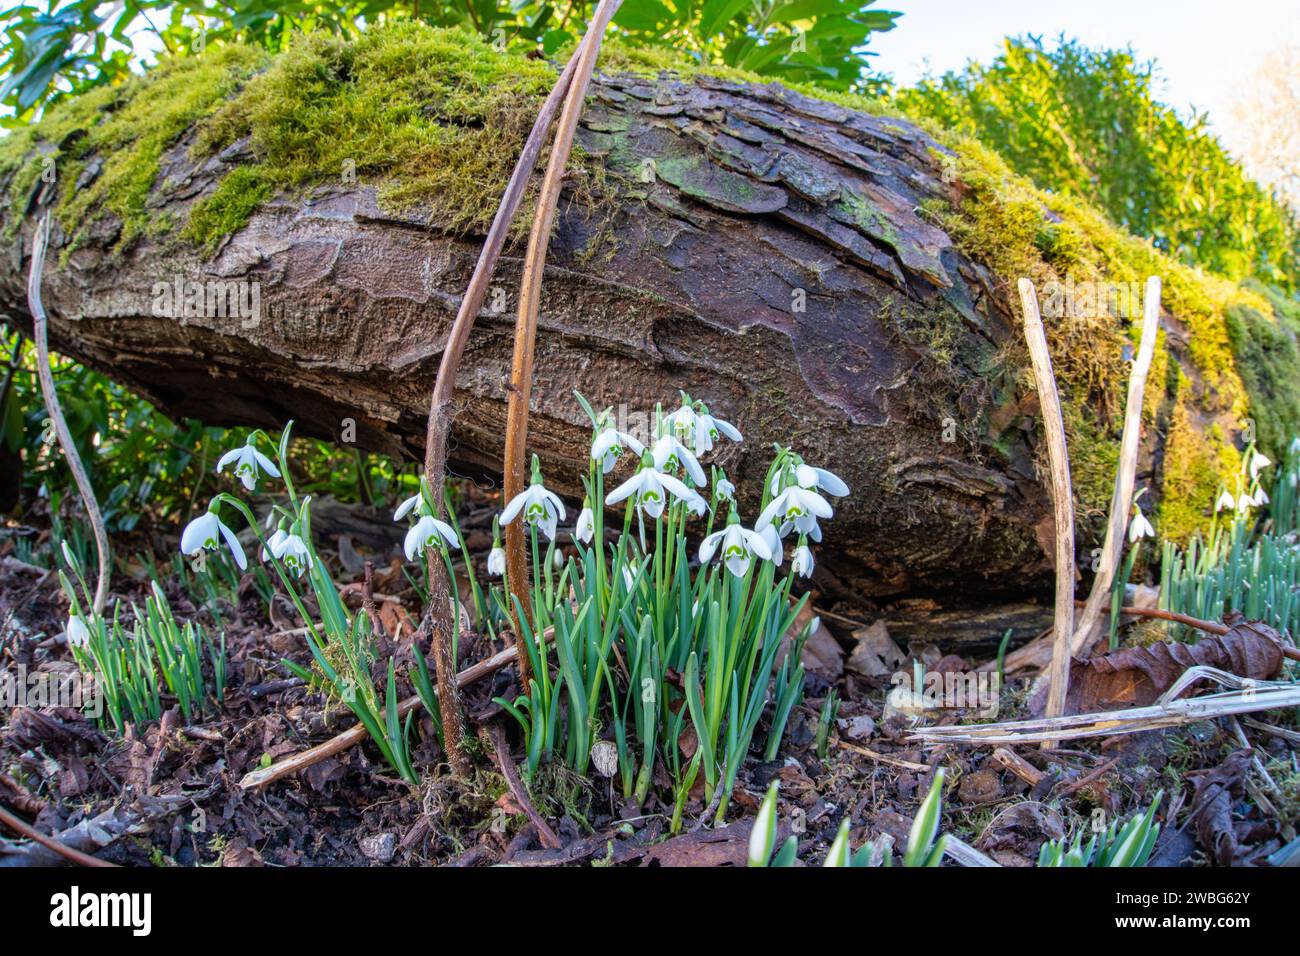 Snowdrops (Galanthus) in flower Stock Photo